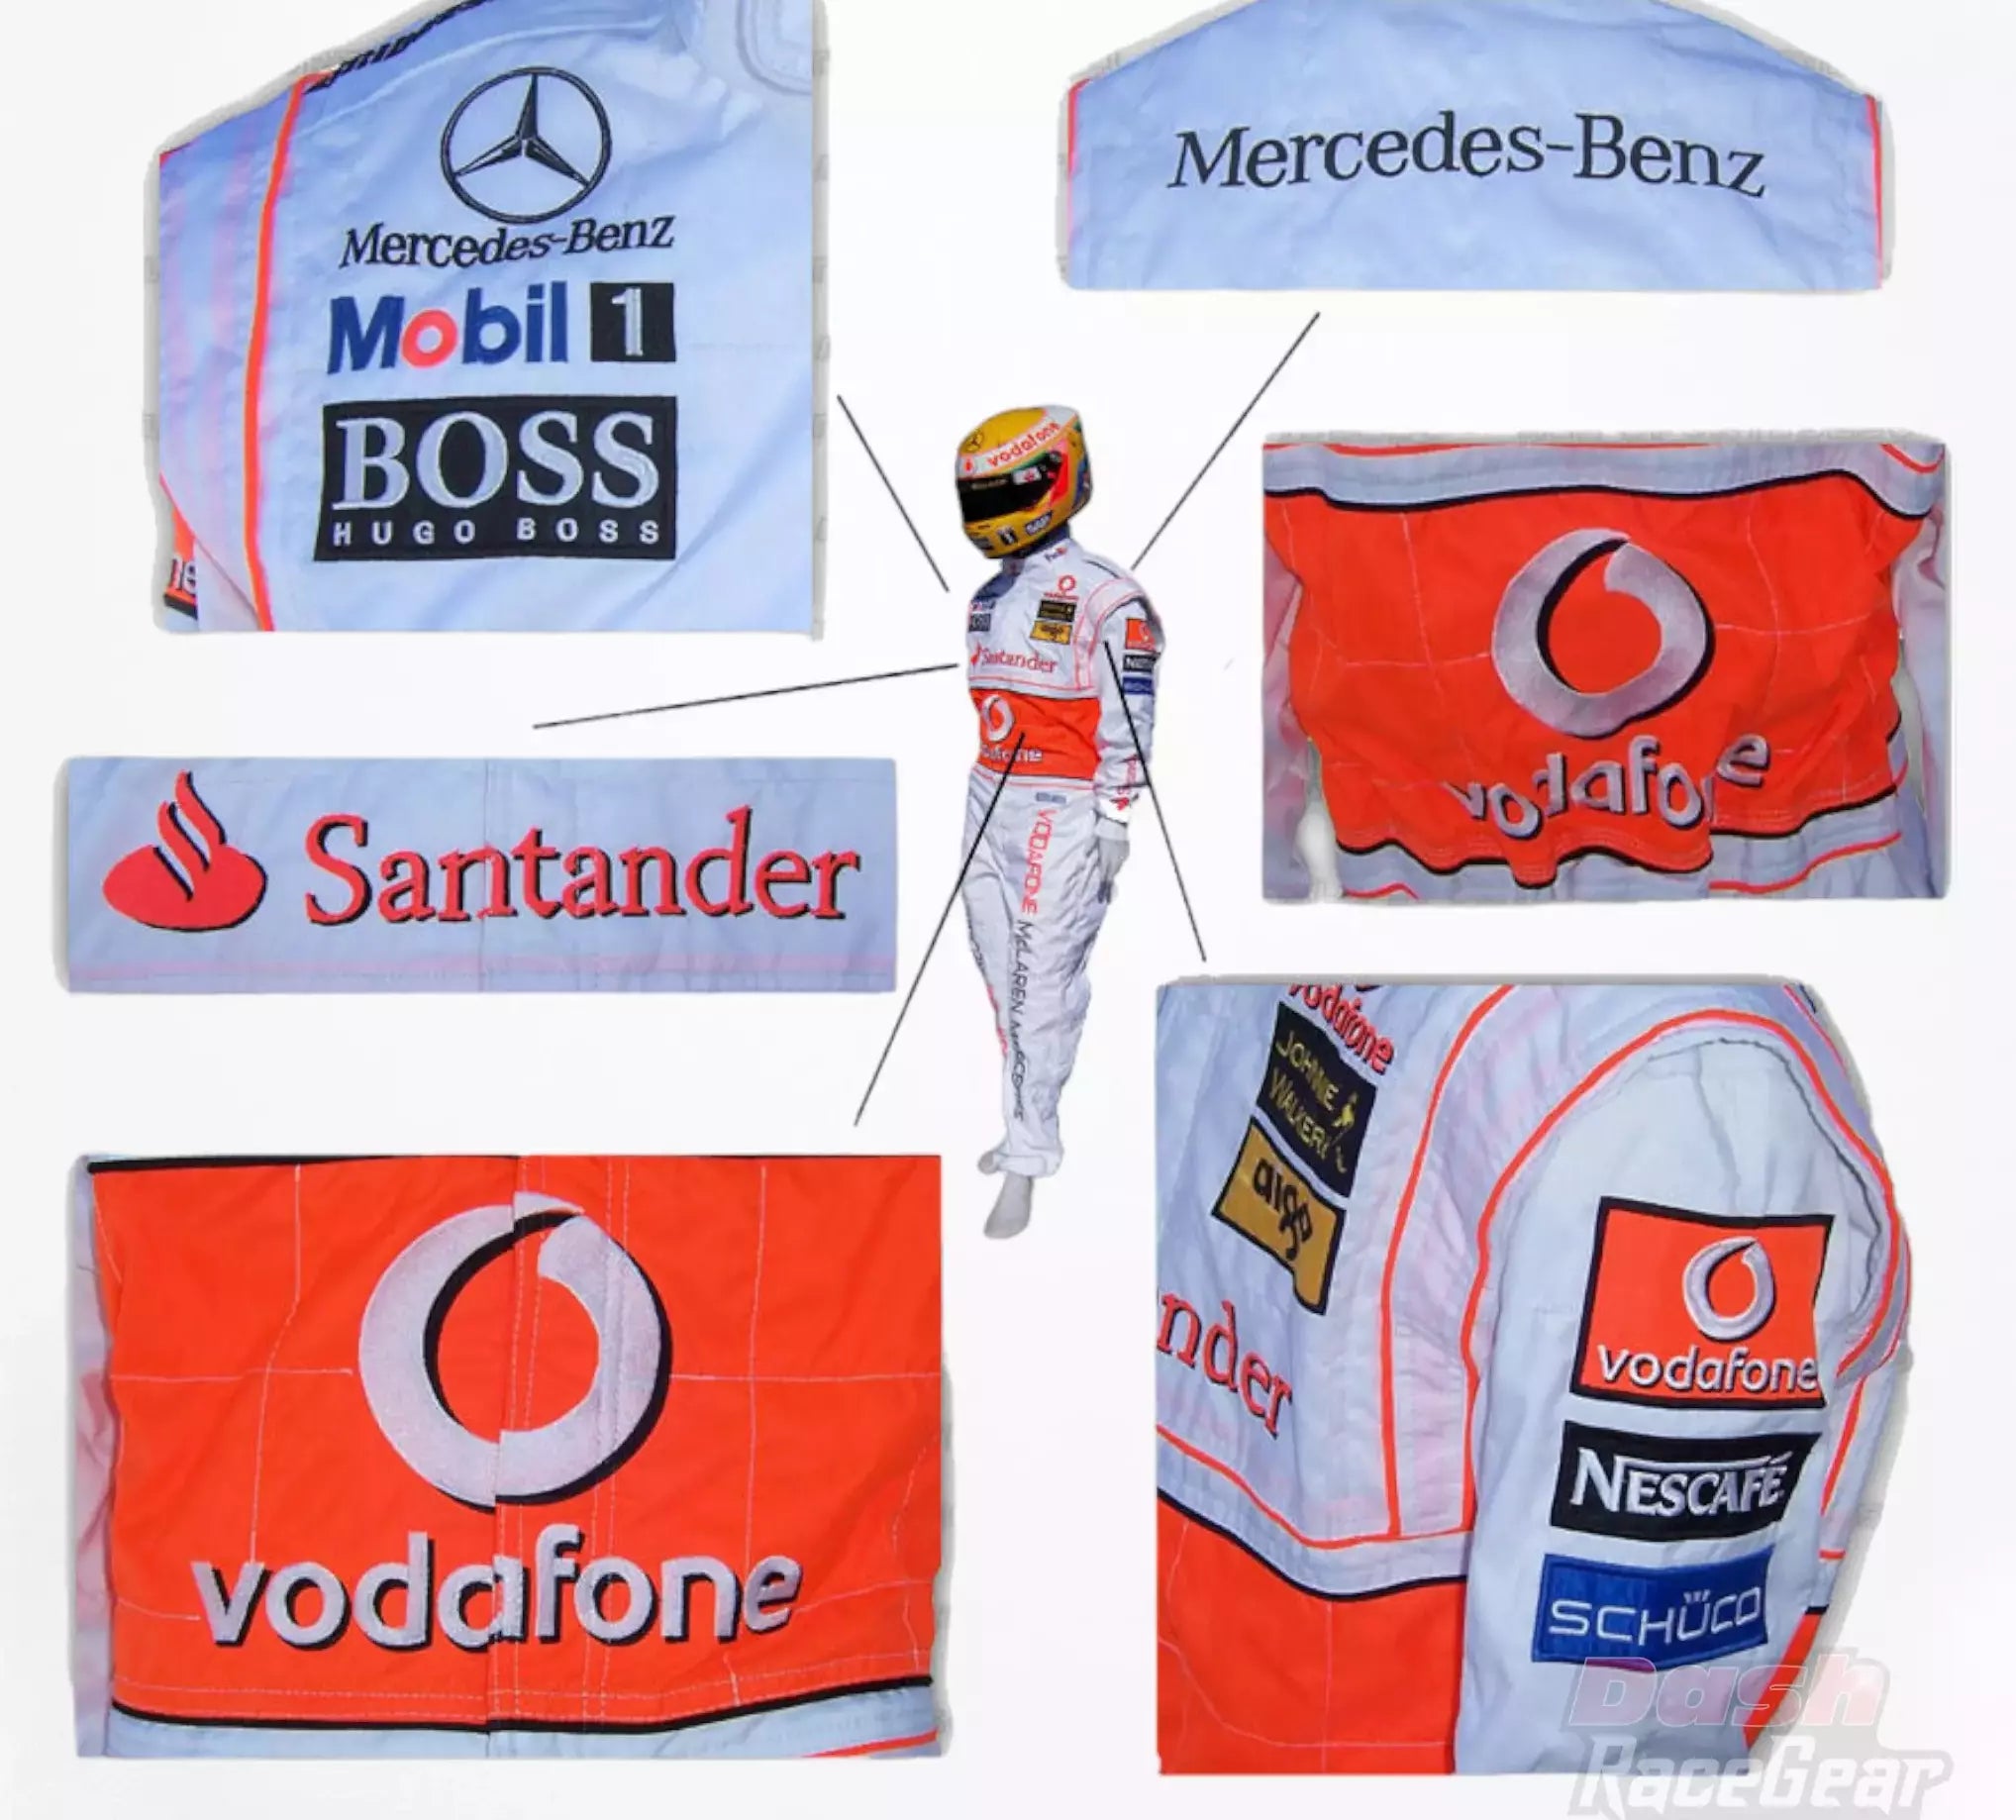 2007 Fernando Alonso McLaren F1 Embroidered Racing Suit